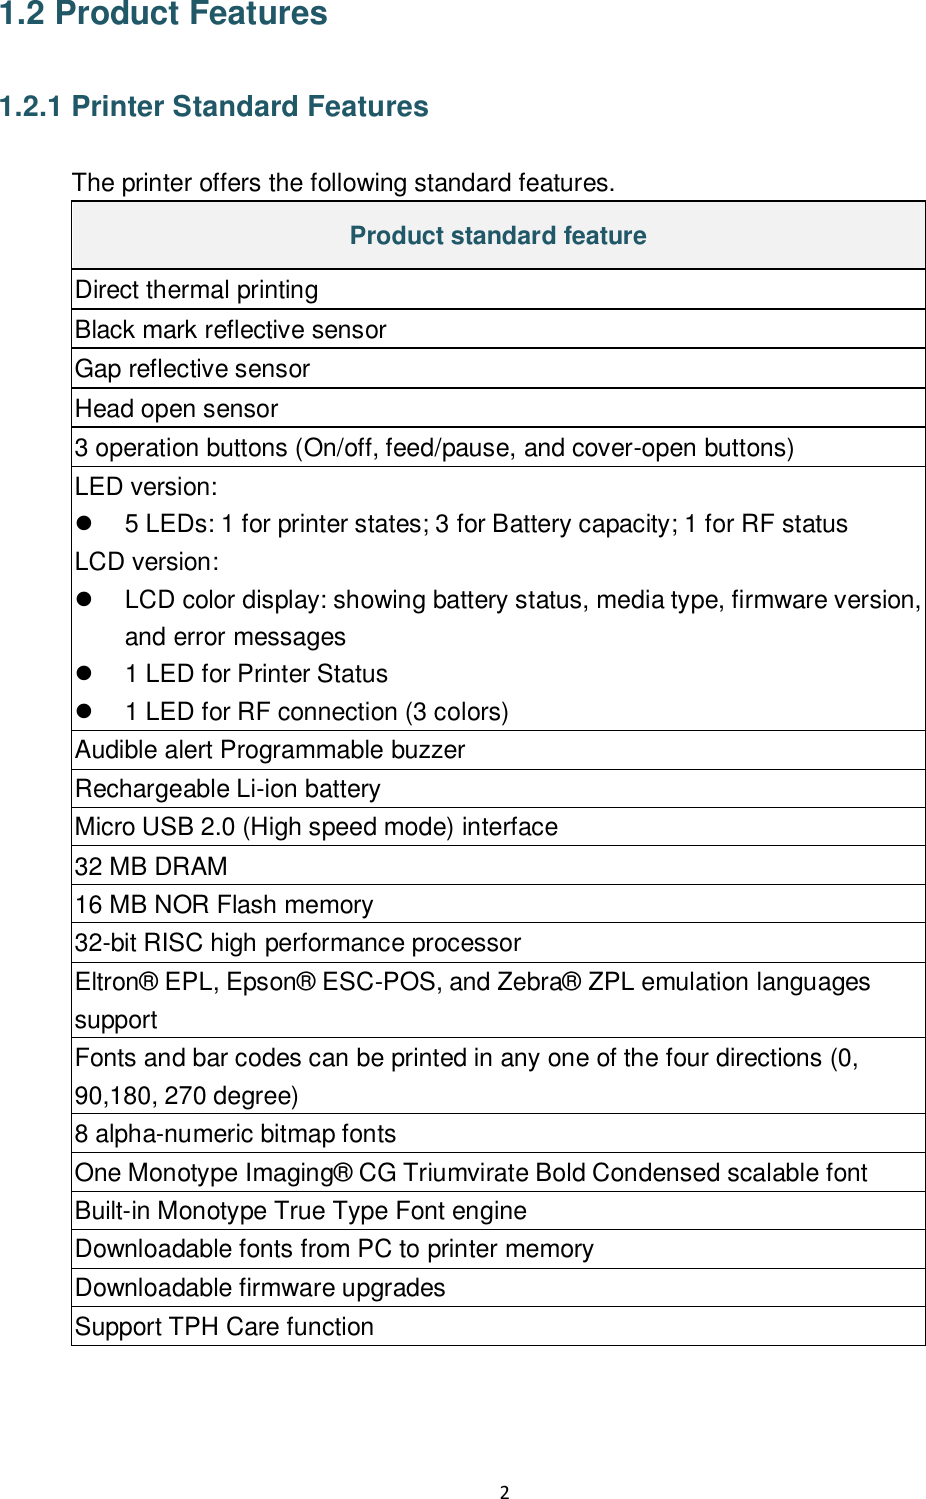 2  1.2 Product Features  1.2.1 Printer Standard Features  The printer offers the following standard features. Product standard feature Direct thermal printing Black mark reflective sensor Gap reflective sensor Head open sensor 3 operation buttons (On/off, feed/pause, and cover-open buttons) LED version:   5 LEDs: 1 for printer states; 3 for Battery capacity; 1 for RF status LCD version:   LCD color display: showing battery status, media type, firmware version, and error messages   1 LED for Printer Status   1 LED for RF connection (3 colors) Audible alert Programmable buzzer Rechargeable Li-ion battery Micro USB 2.0 (High speed mode) interface  32 MB DRAM 16 MB NOR Flash memory 32-bit RISC high performance processor Eltron®  EPL, Epson®  ESC-POS, and Zebra®  ZPL emulation languages support Fonts and bar codes can be printed in any one of the four directions (0, 90,180, 270 degree) 8 alpha-numeric bitmap fonts One Monotype Imaging®  CG Triumvirate Bold Condensed scalable font Built-in Monotype True Type Font engine Downloadable fonts from PC to printer memory Downloadable firmware upgrades Support TPH Care function 